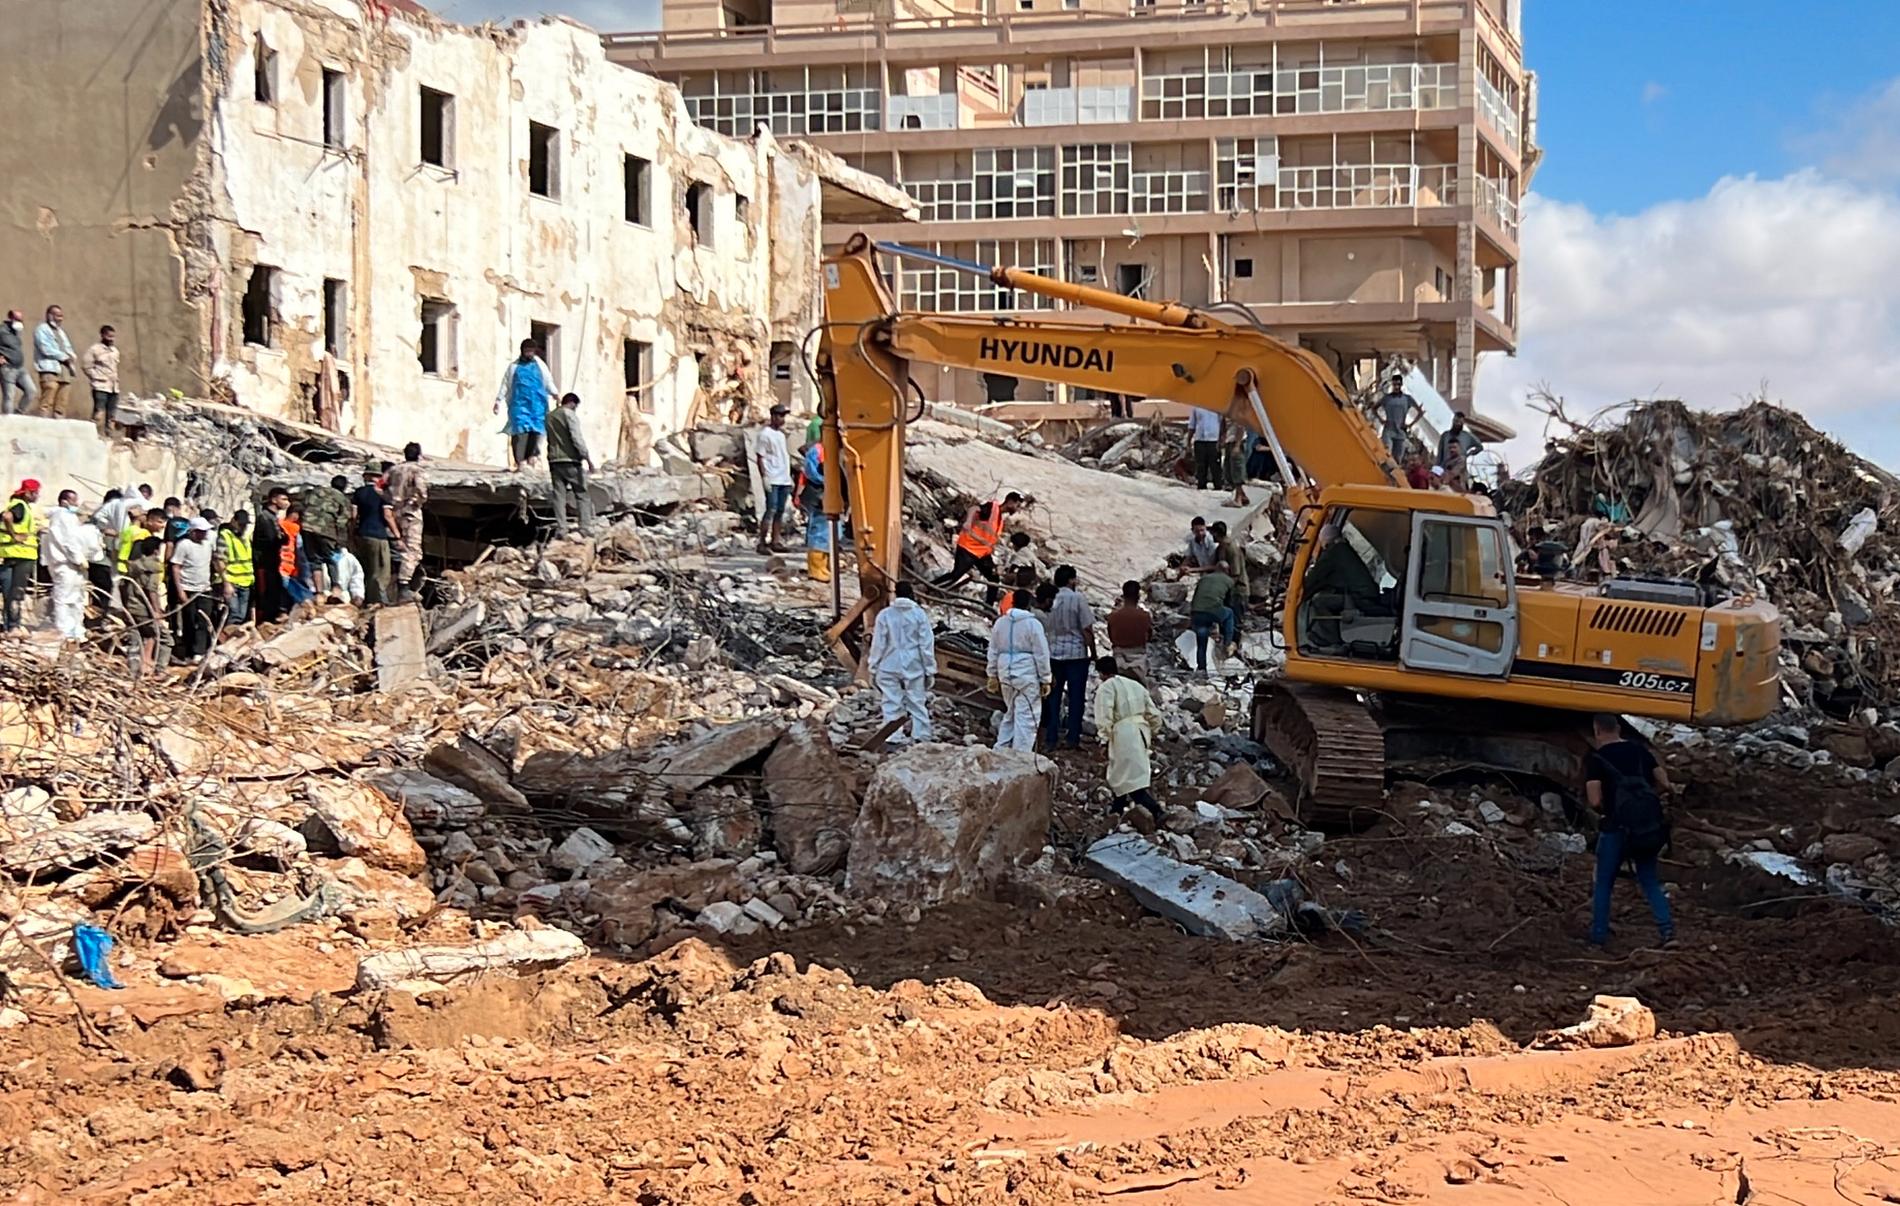 Collapse: Searches are underway in a collapsed building in the city of Derna after the dam collapse and the flood disaster. 